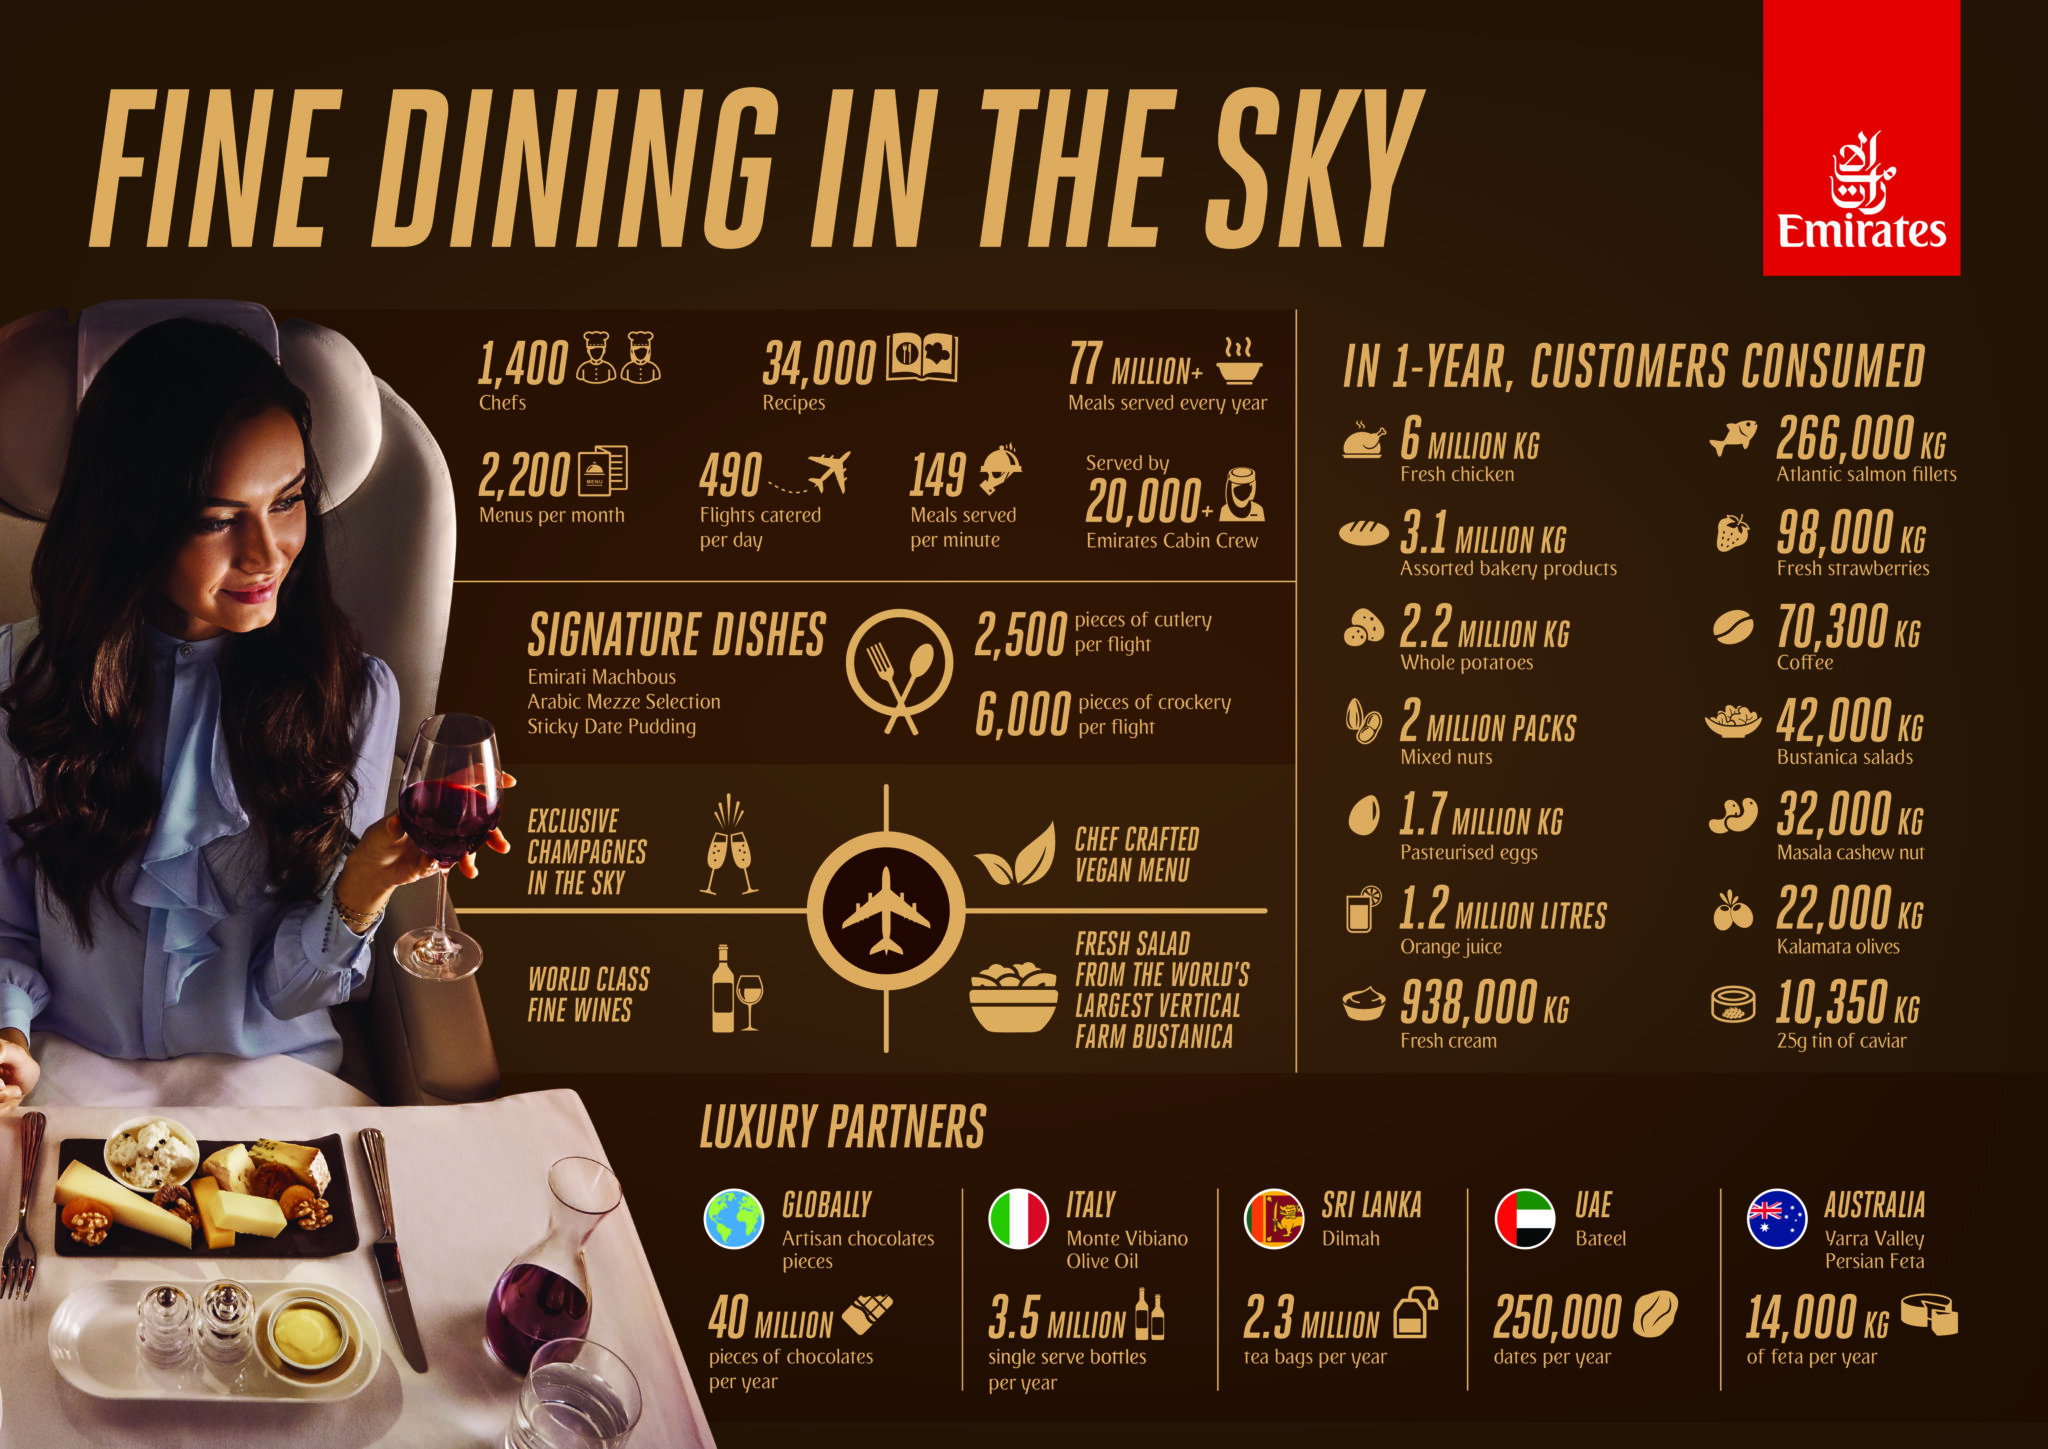 fine dining in the sky emirates serves more than 77 million moreish meals a year